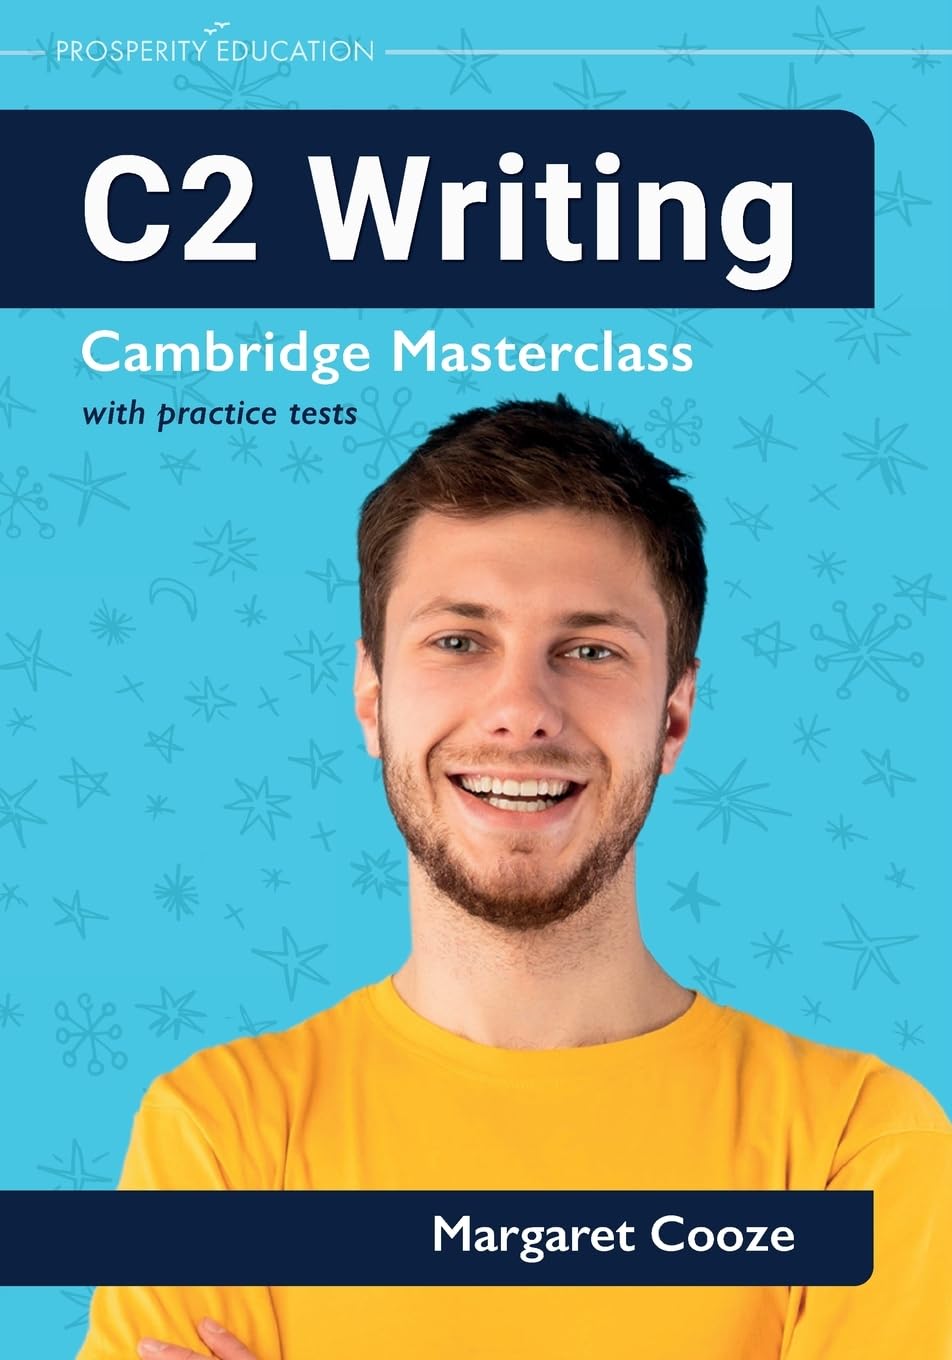 C2 Writing Cambridge Masterclass With Practice Tests | Margaret Cooze